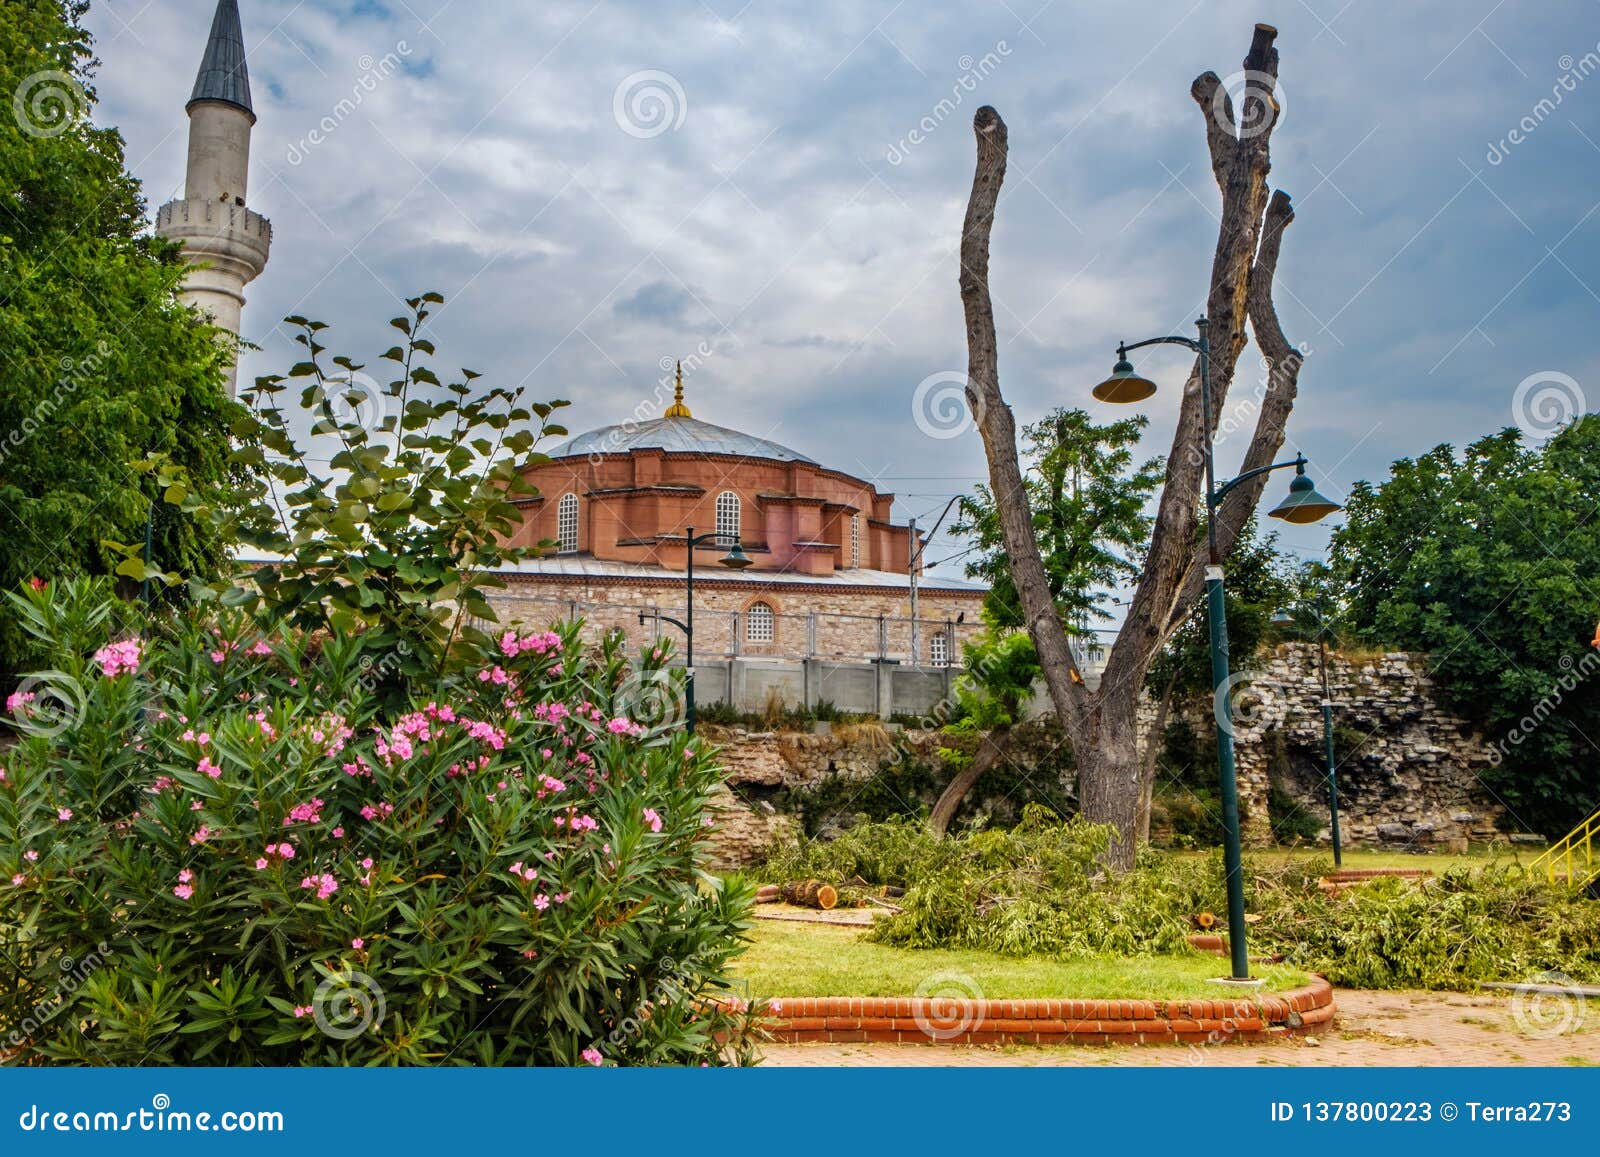 istanbul, turkey. sultanahmed. view of the mosque and the park